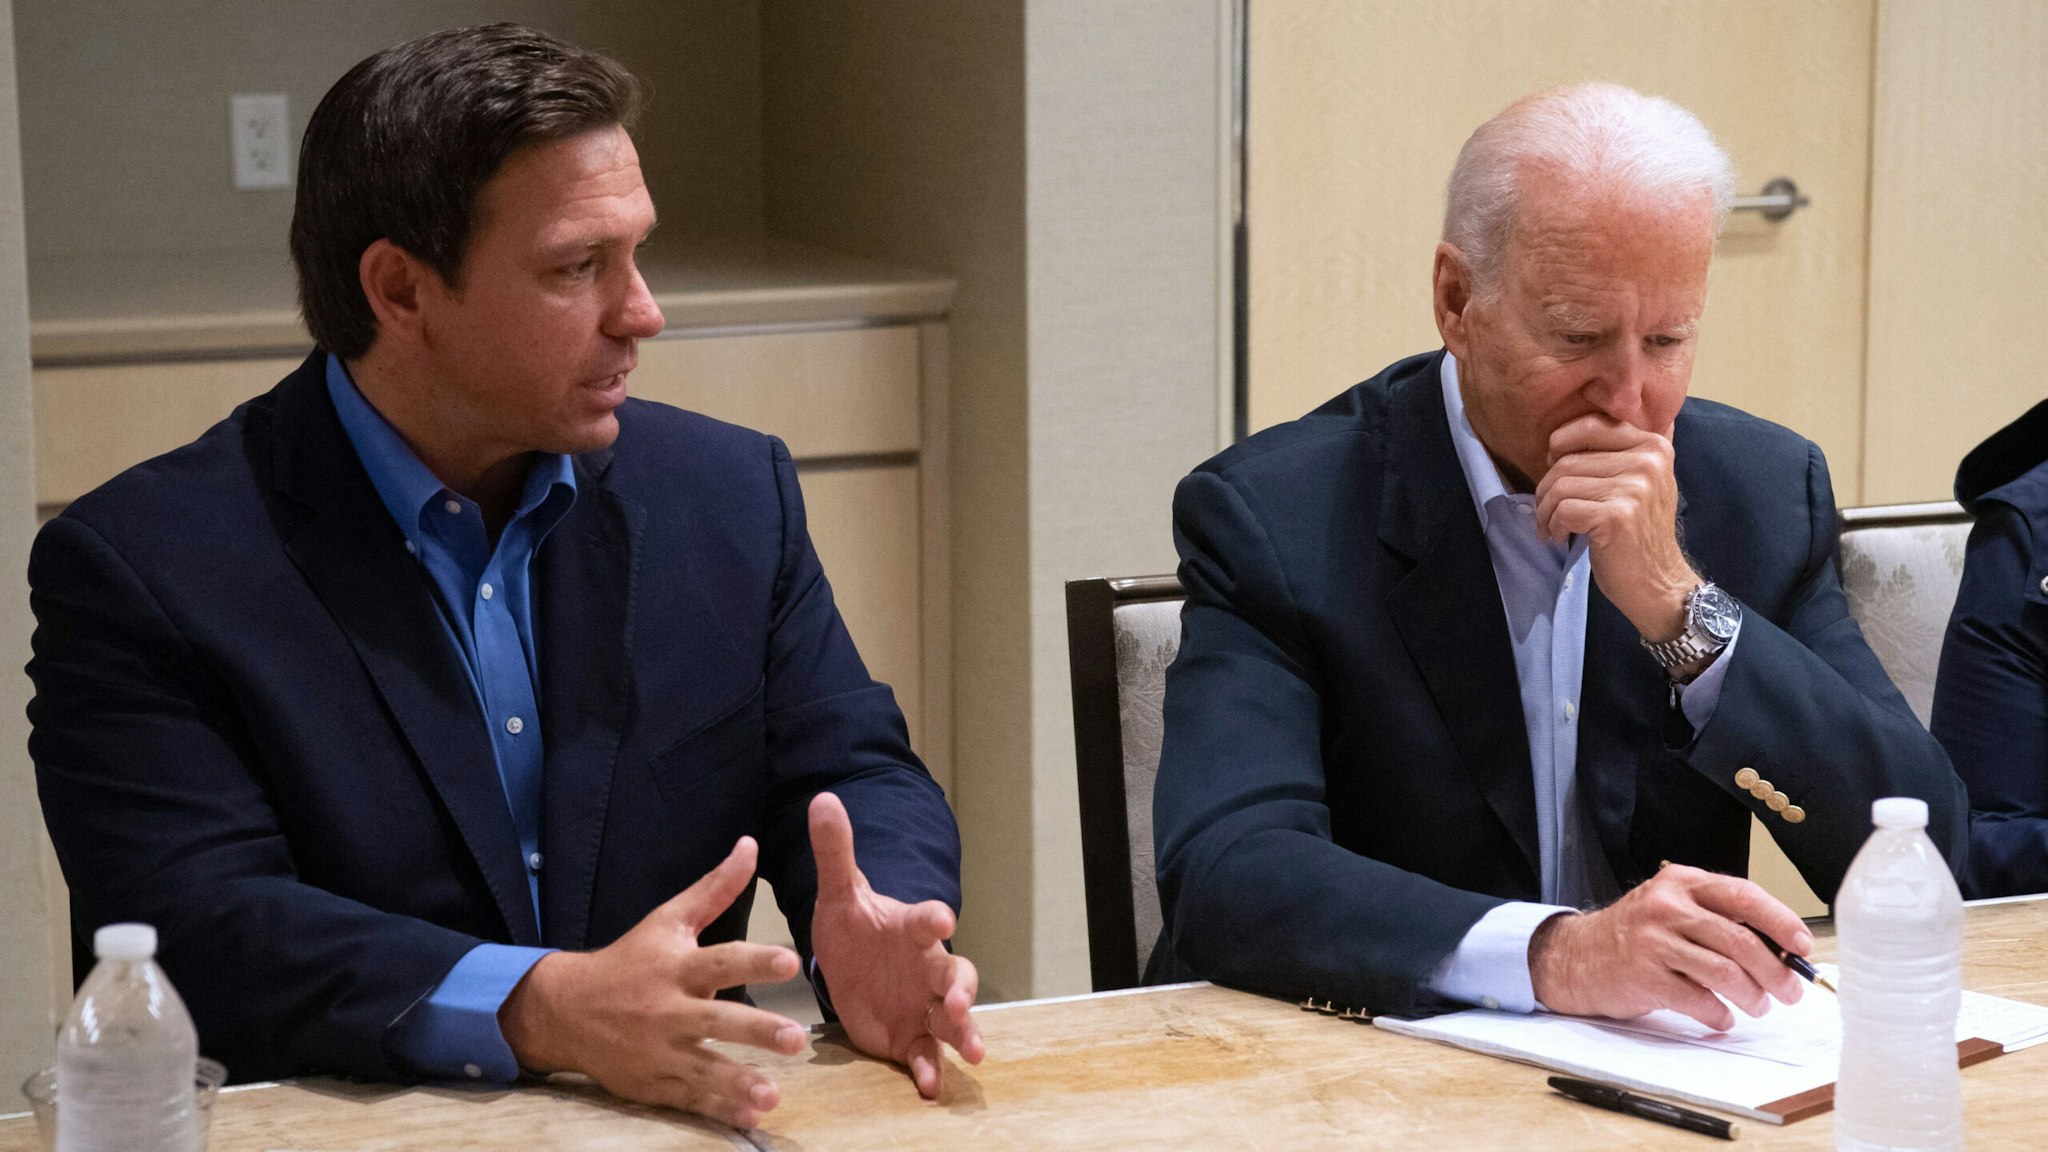 US President Joe Biden alongside Florida Governor Ron DeSantis (L) speaks about the collapse of the 12-story Champlain Towers South condo building in Surfside, during a briefing in Miami Beach, Florida, July 1, 2021. - President Joe Biden flew to Florida on Thursday to "comfort" families of people killed or still missing in the rubble of a beachfront apartment building, where hopes of finding survivors had all but evaporated. Biden and First Lady Jill Biden left the White House early for the flight to Miami, and then traveled by motorcade to nearby Surfside, where the death toll in the tragedy now stands at 18, and more than 140 still unaccounted for.